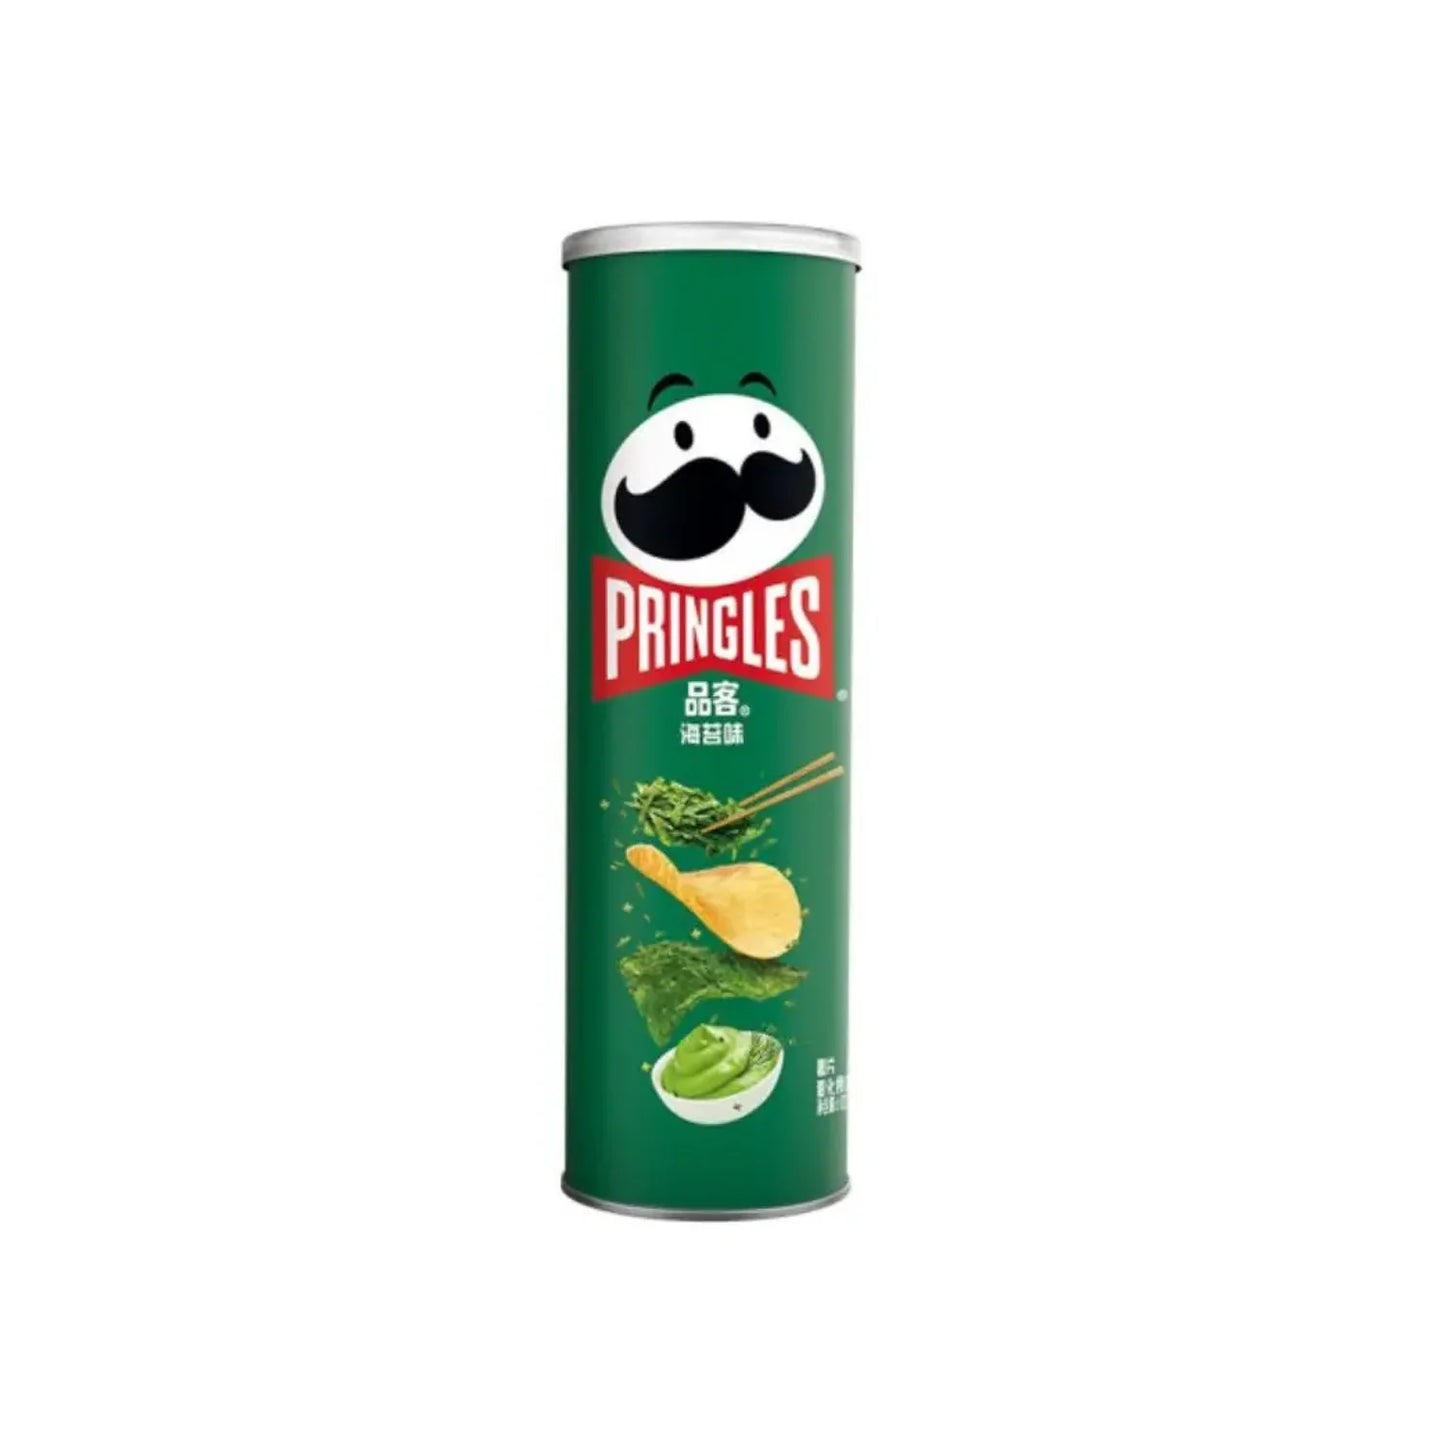 Pringles Seaweed Flavor - (Wholesale Case of 20 Cans) - China